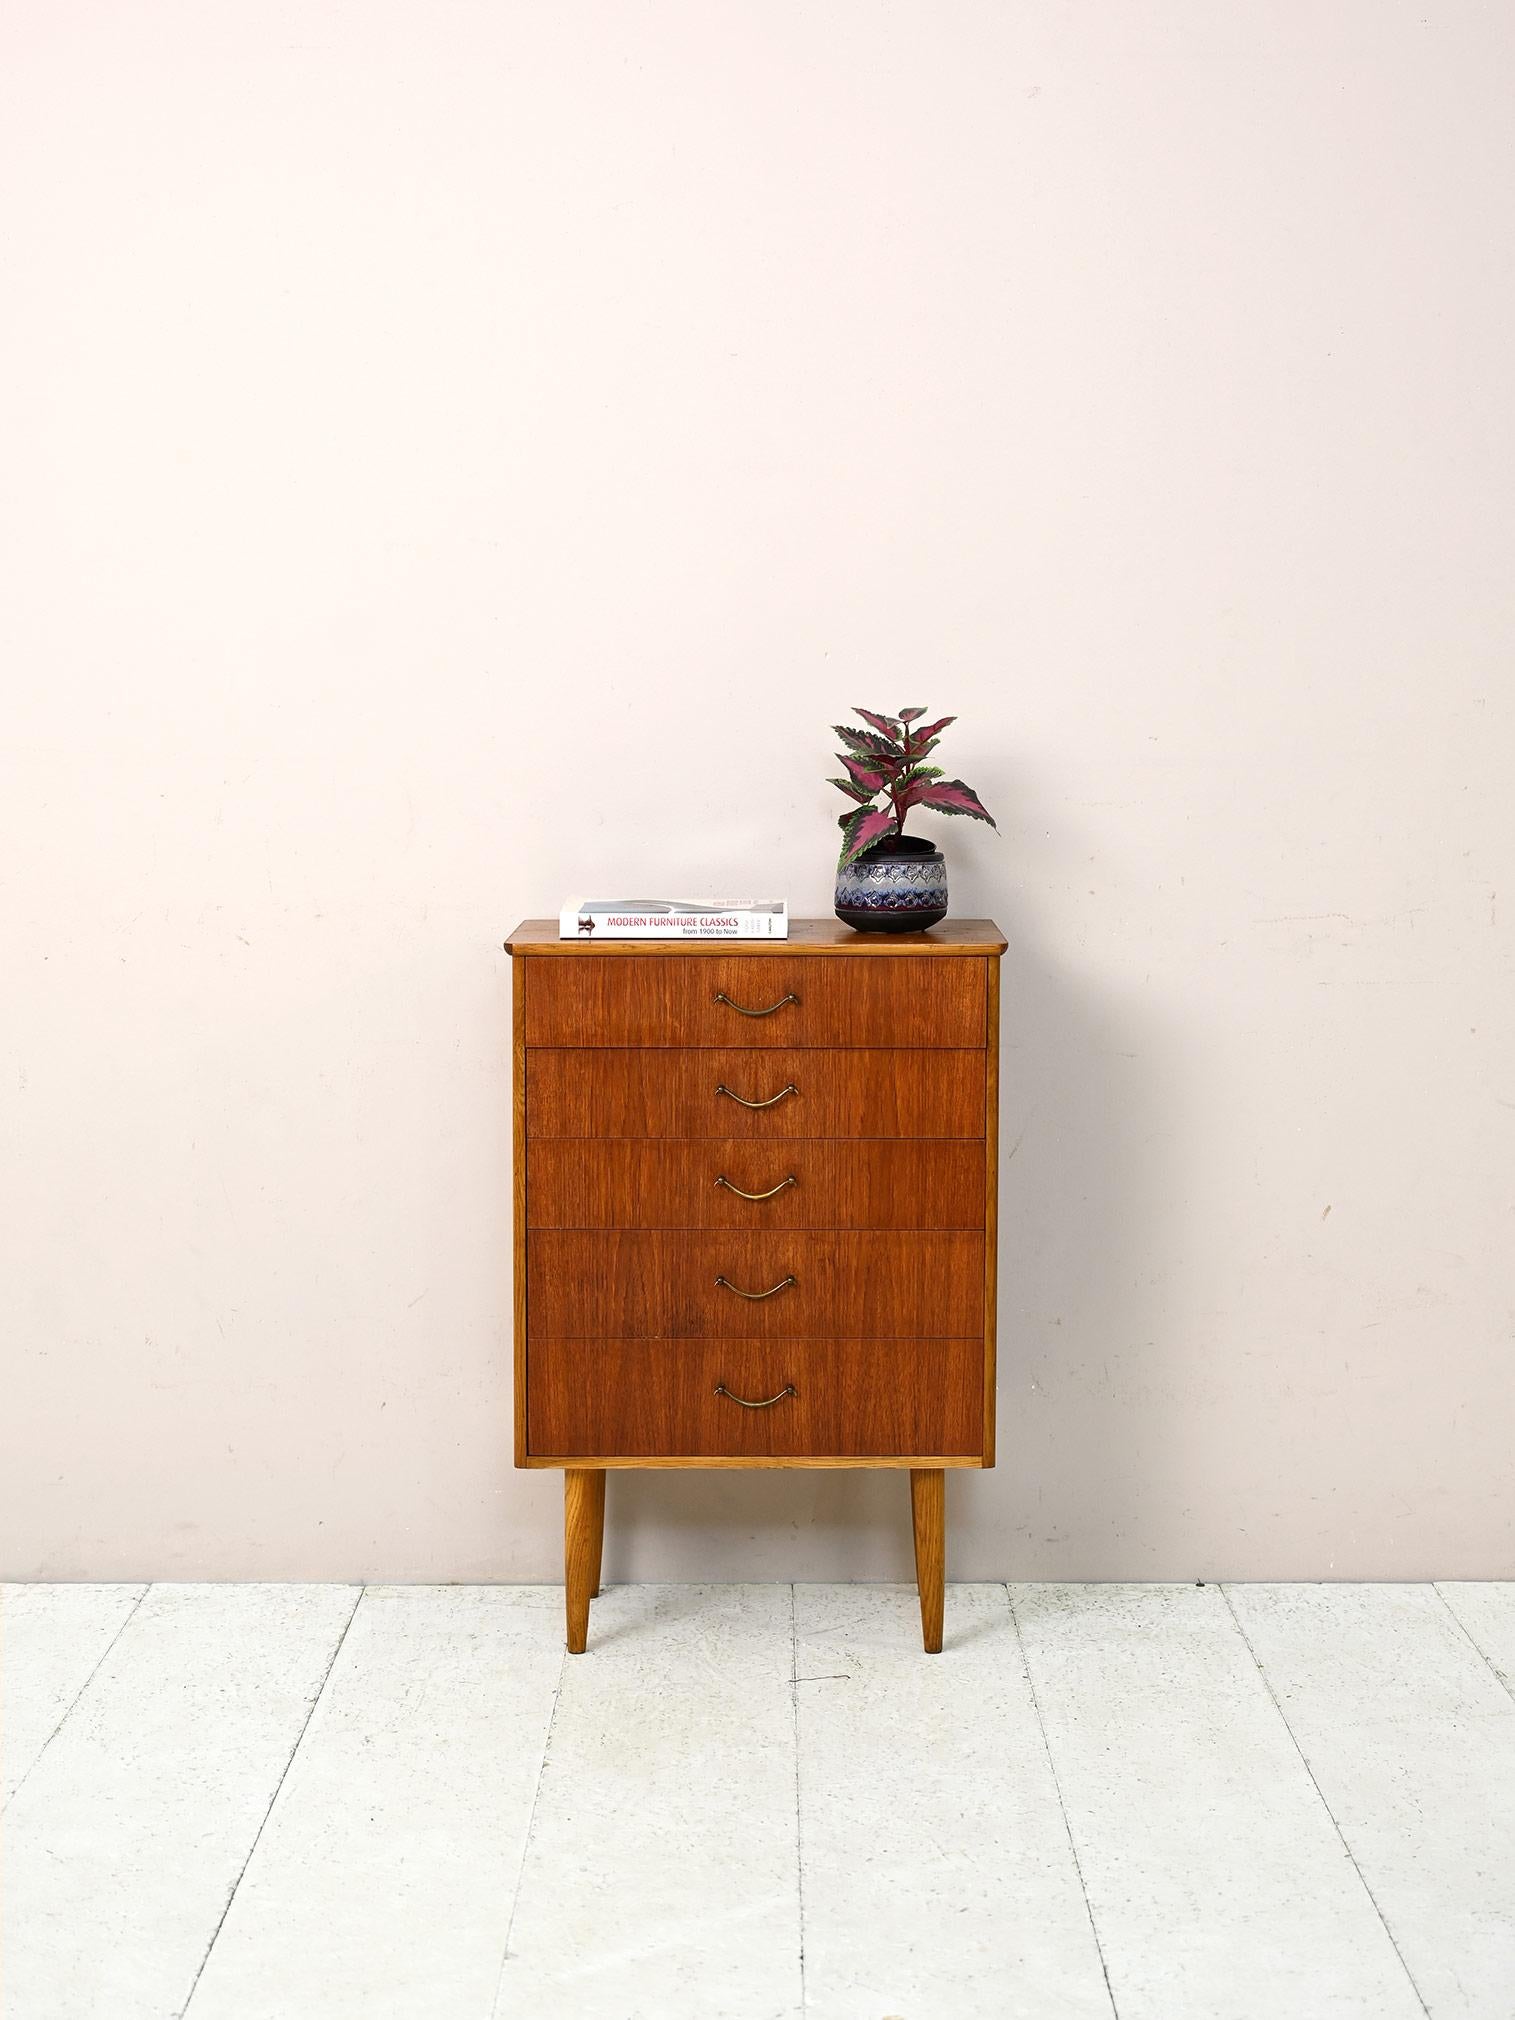 Vintage Scandinavian chest of drawers with 4 drawers.

This elegant and small piece of furniture is ideal for use as an entryway cabinet or as a bedside table. There are 4 convenient drawers with gilded metal handles, and the profile of the frame,